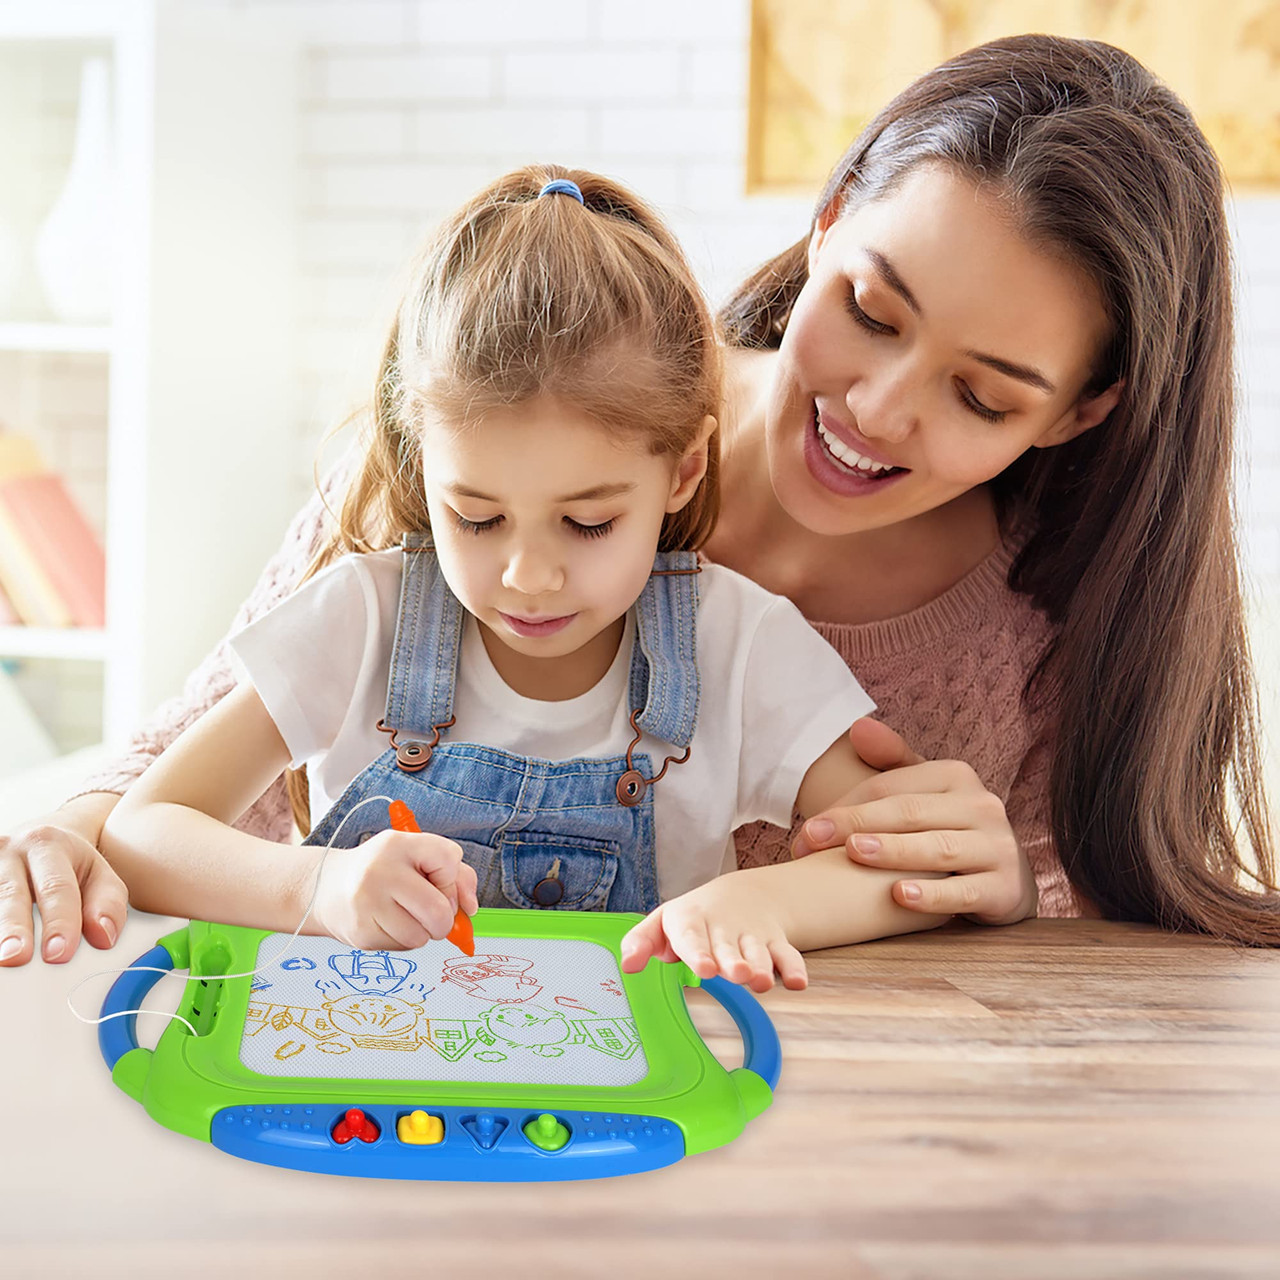 Magnetic Drawing Board Educational Toy - Sketch Pad for Kids, Draw Fre